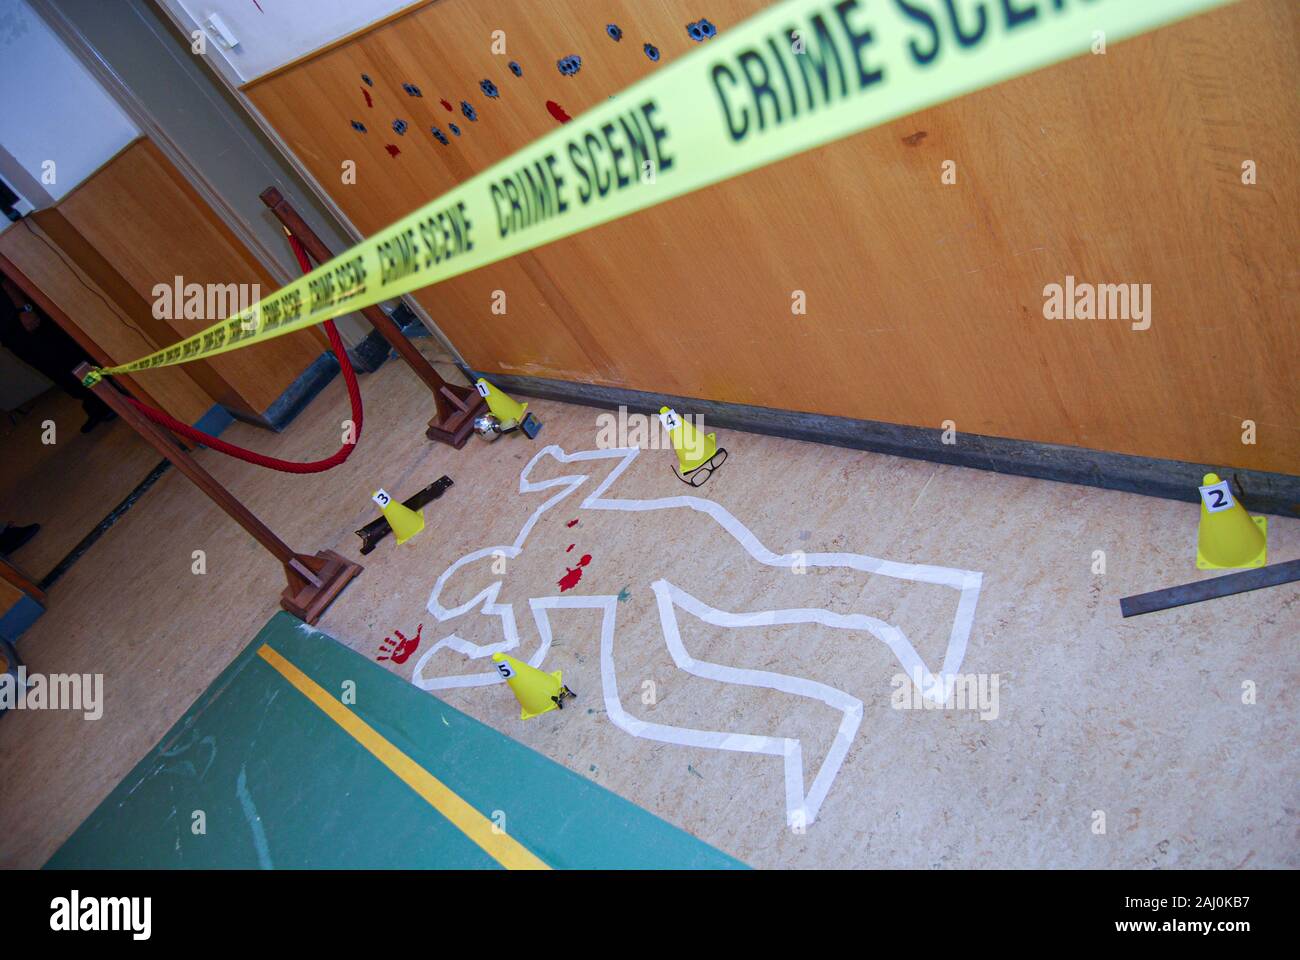 Concept and fictive view of the crime scene secured by the police during the investigation identified evidences by number and cones Stock Photo